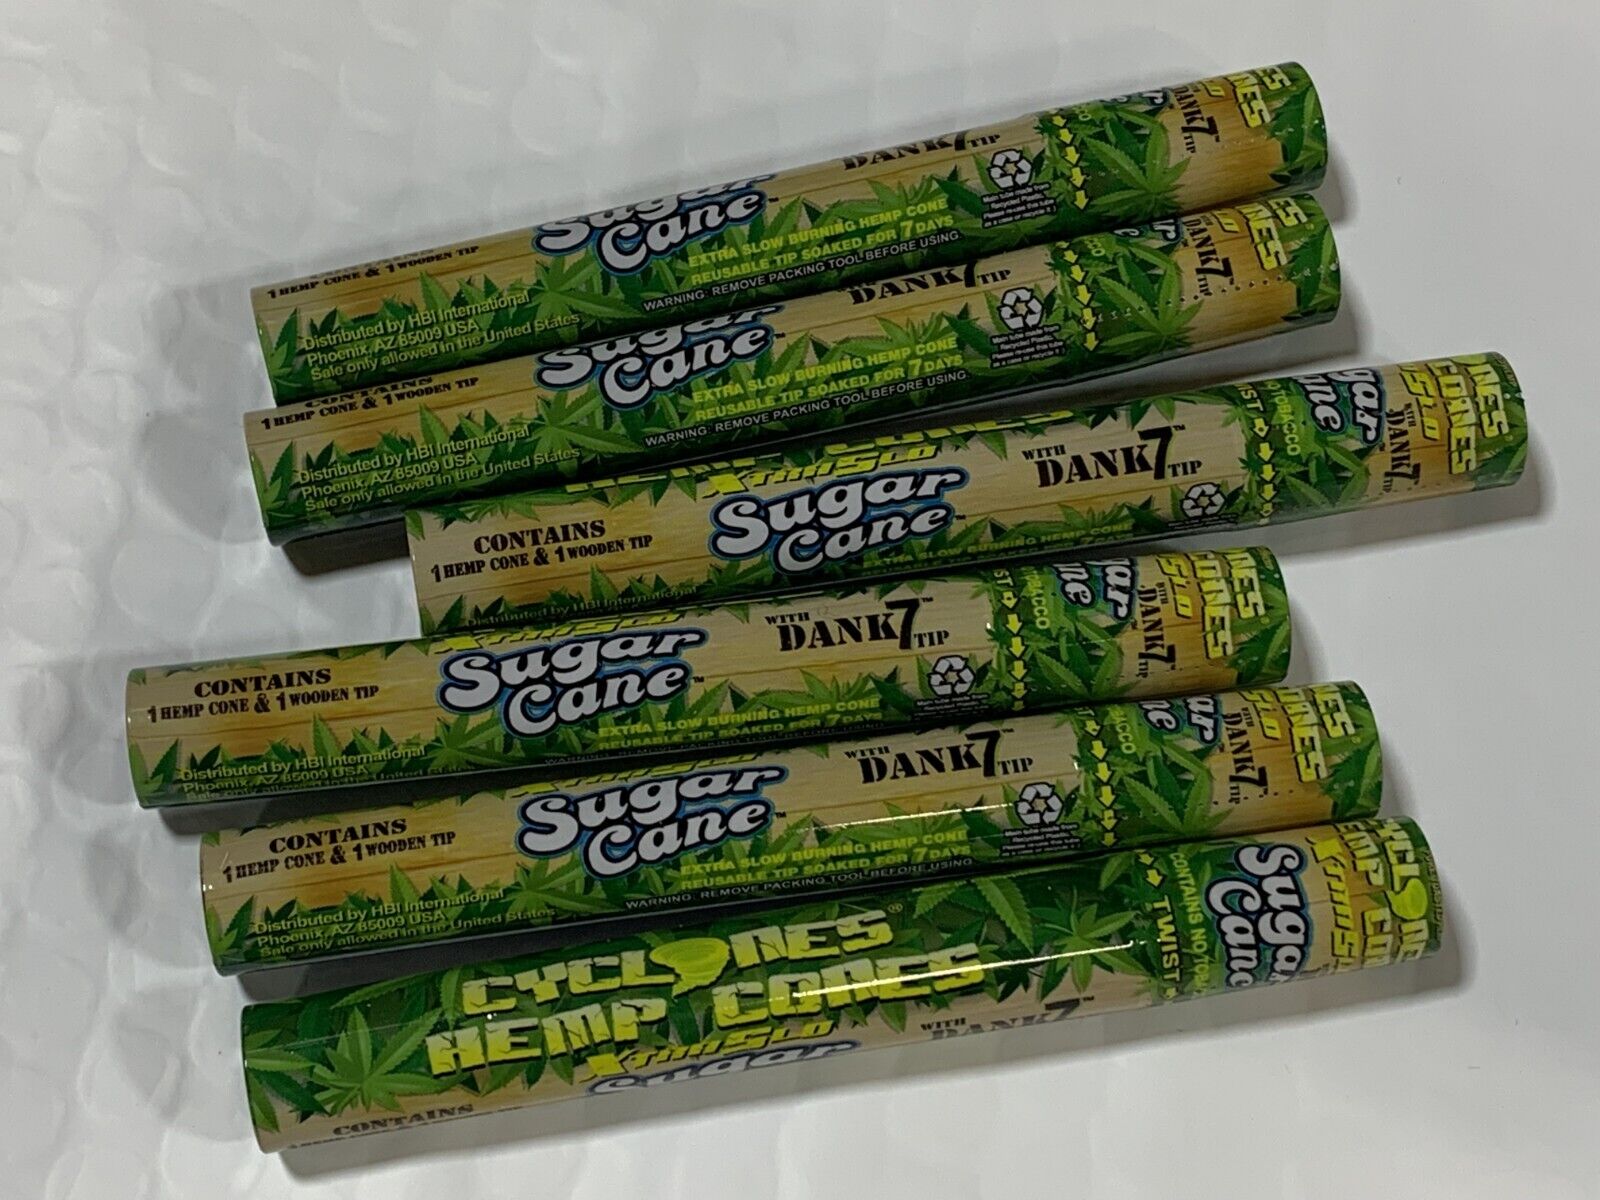 6 PACKS Cyclones SUGAR CANE Flavored XTRASLOW Toasted HMP Cones